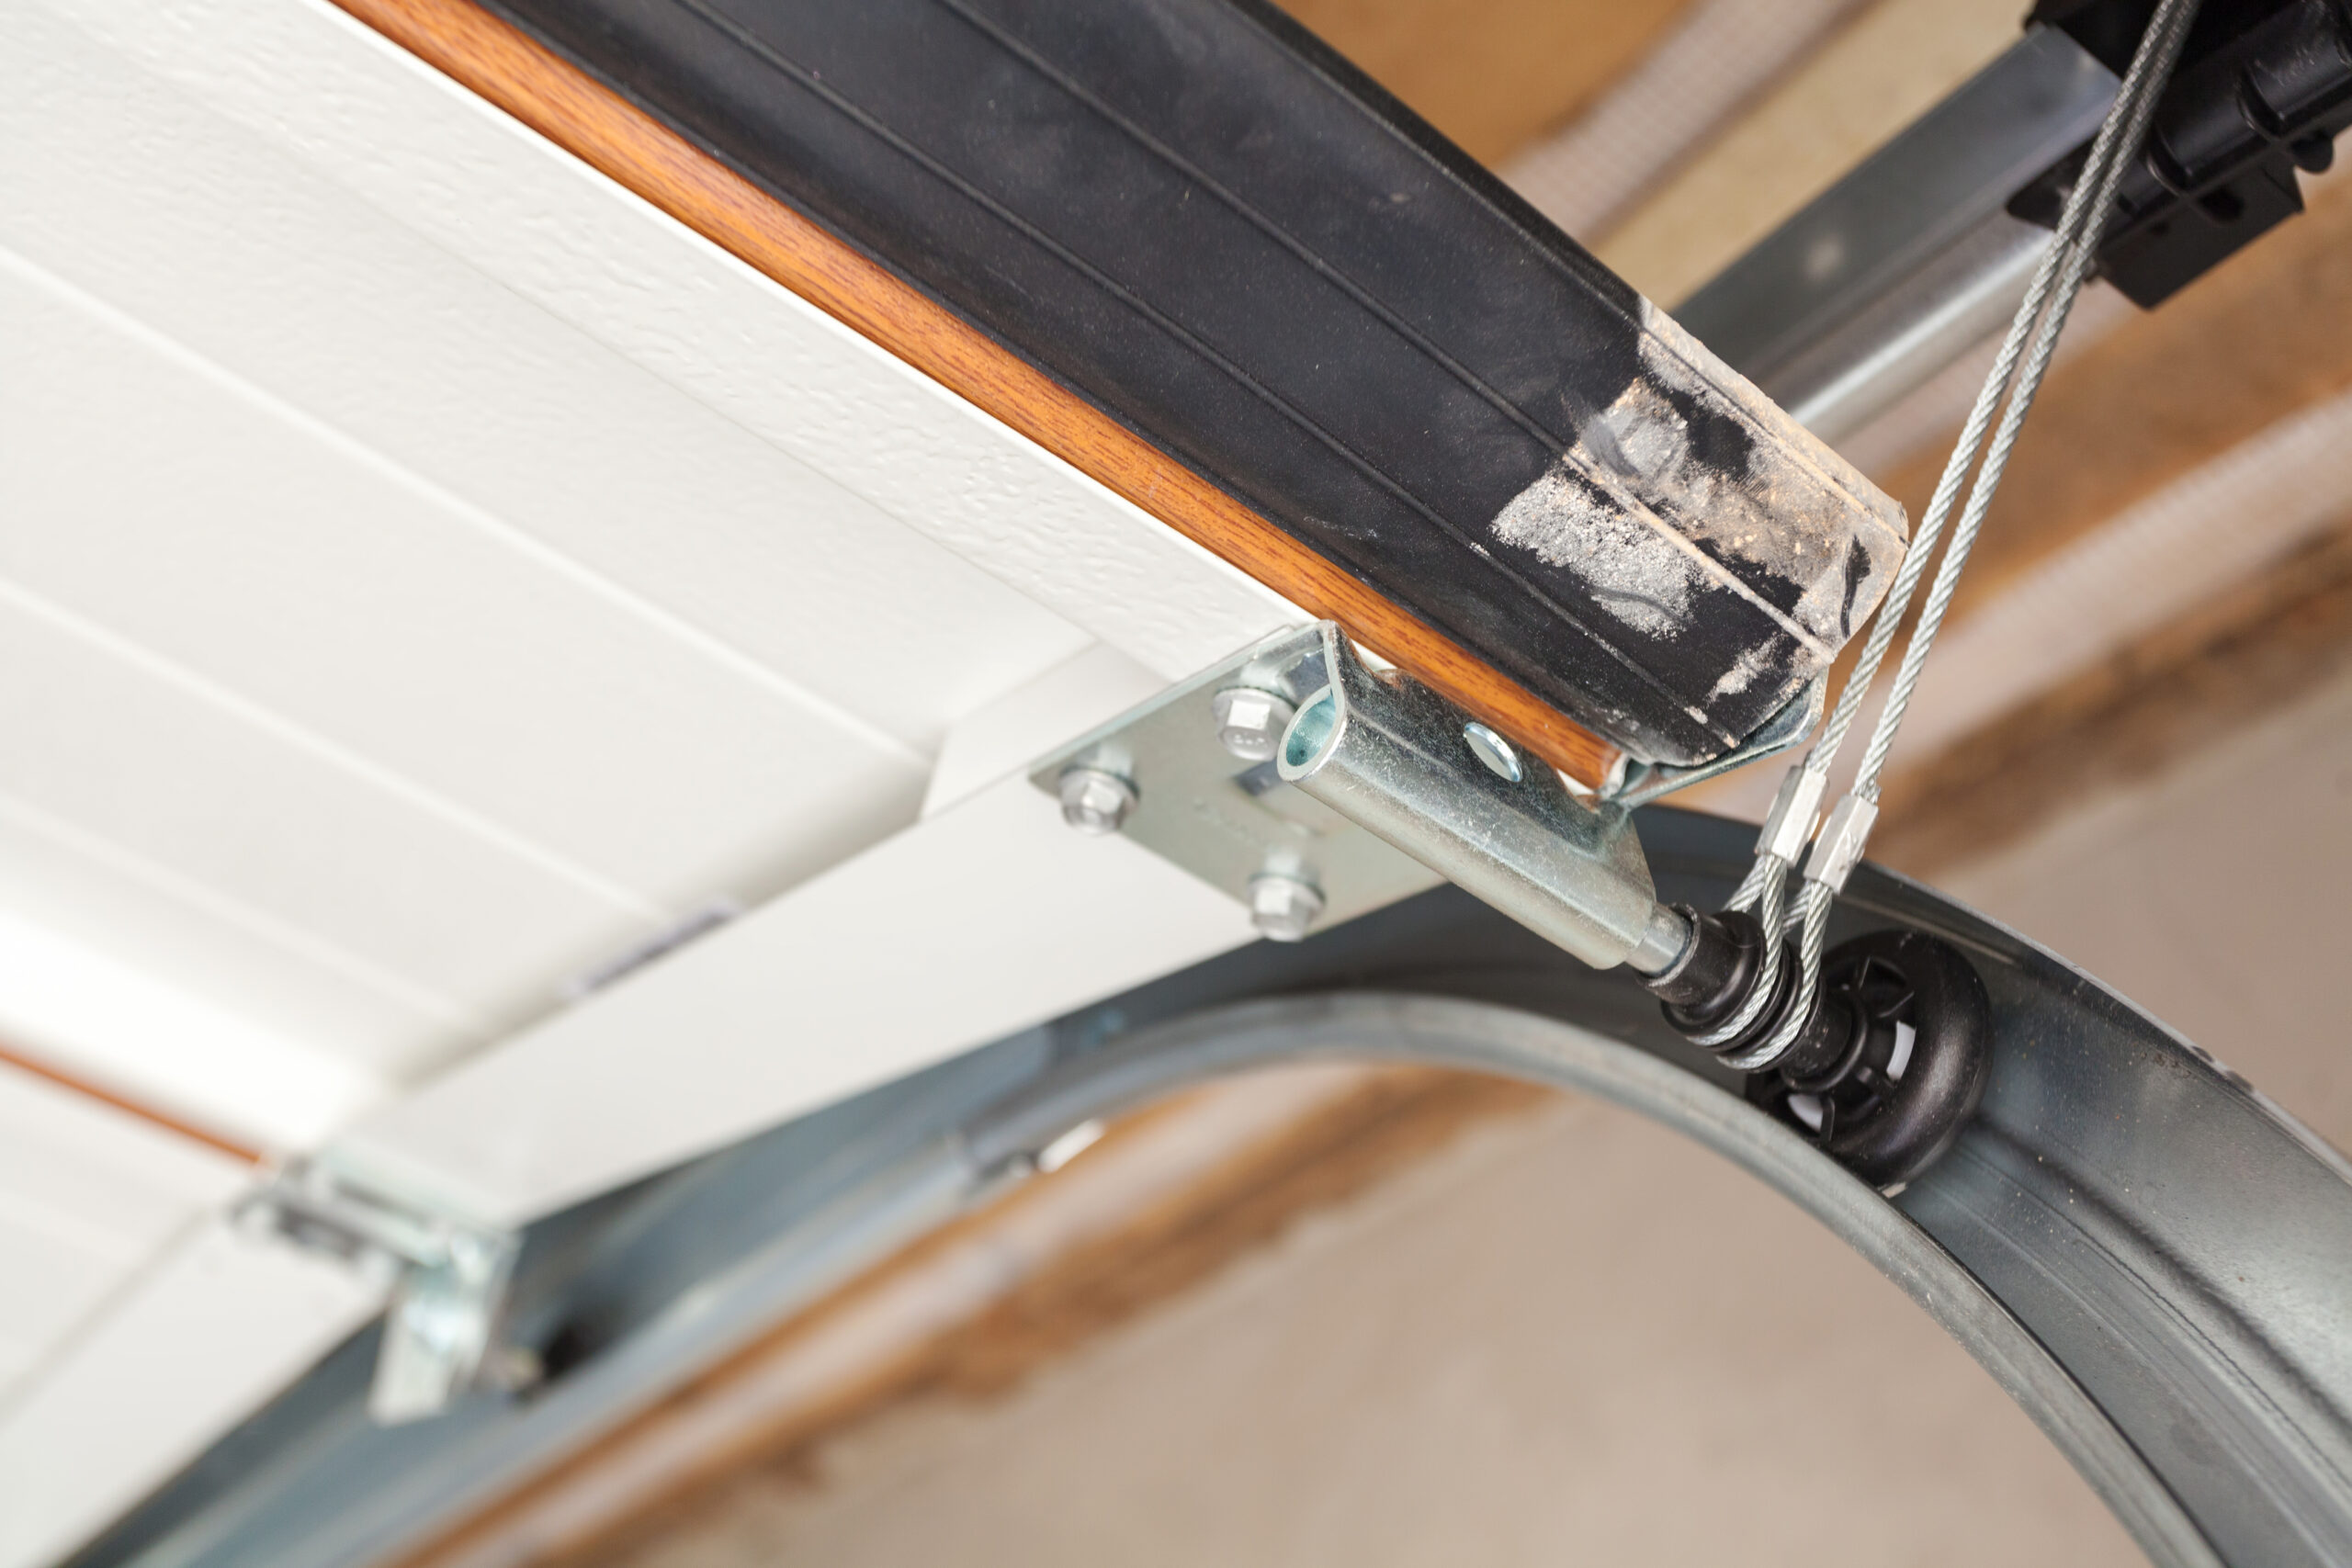 How To Lubricate Garage Door: Step-By-Step Guide & Tips